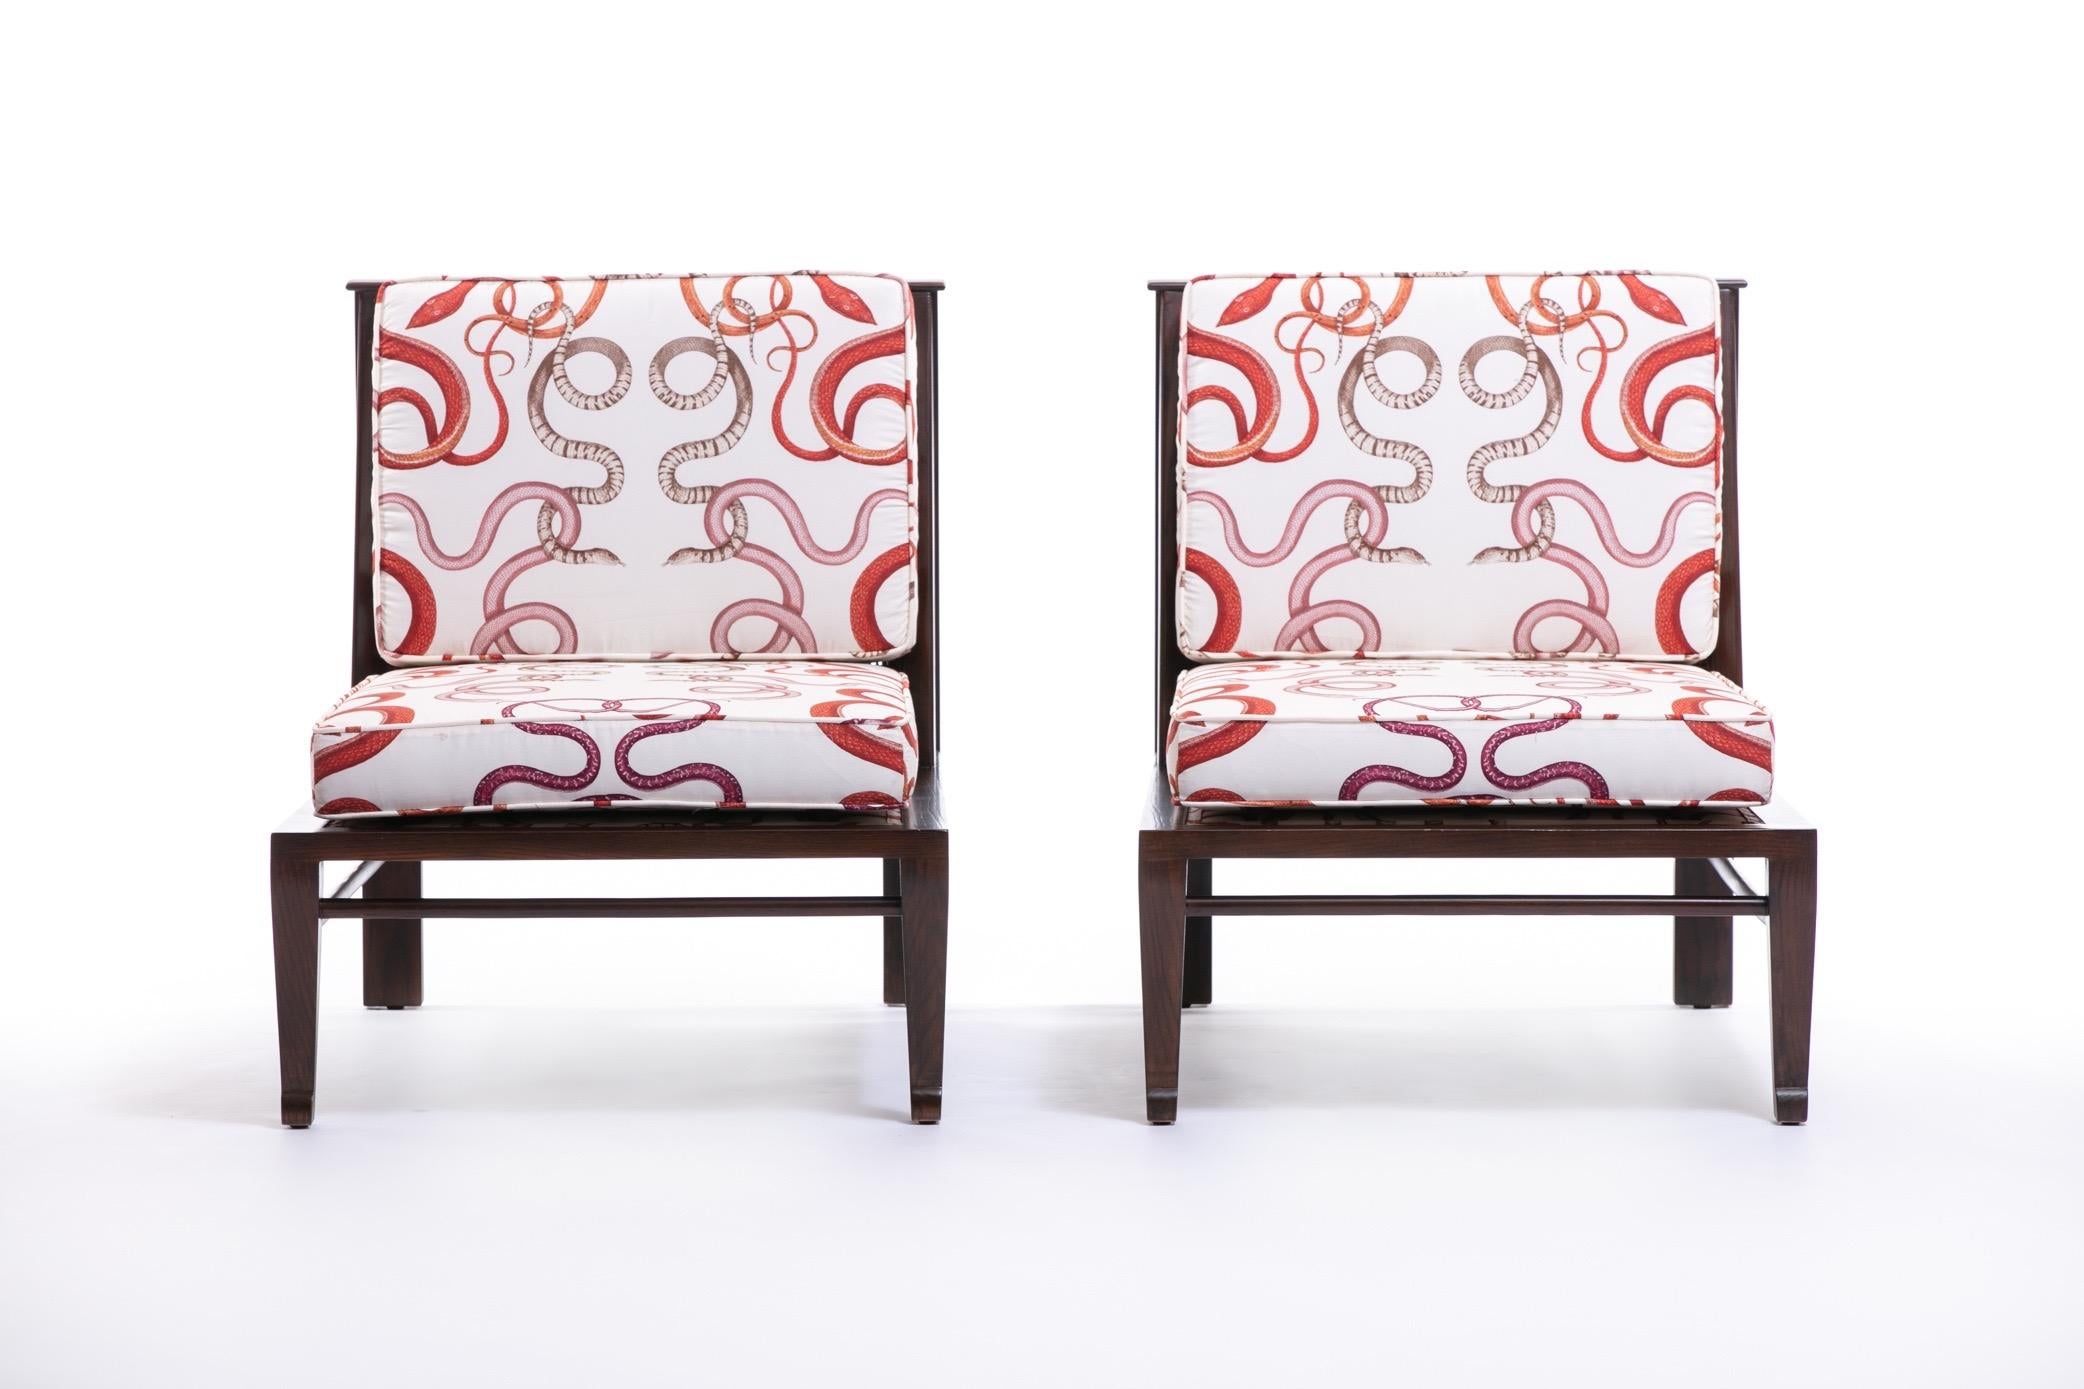 To understand these William Pahlmann Thebes chairs with Schumacher Giove fabric and their significance, a bit of background and context is in order. Described as a 